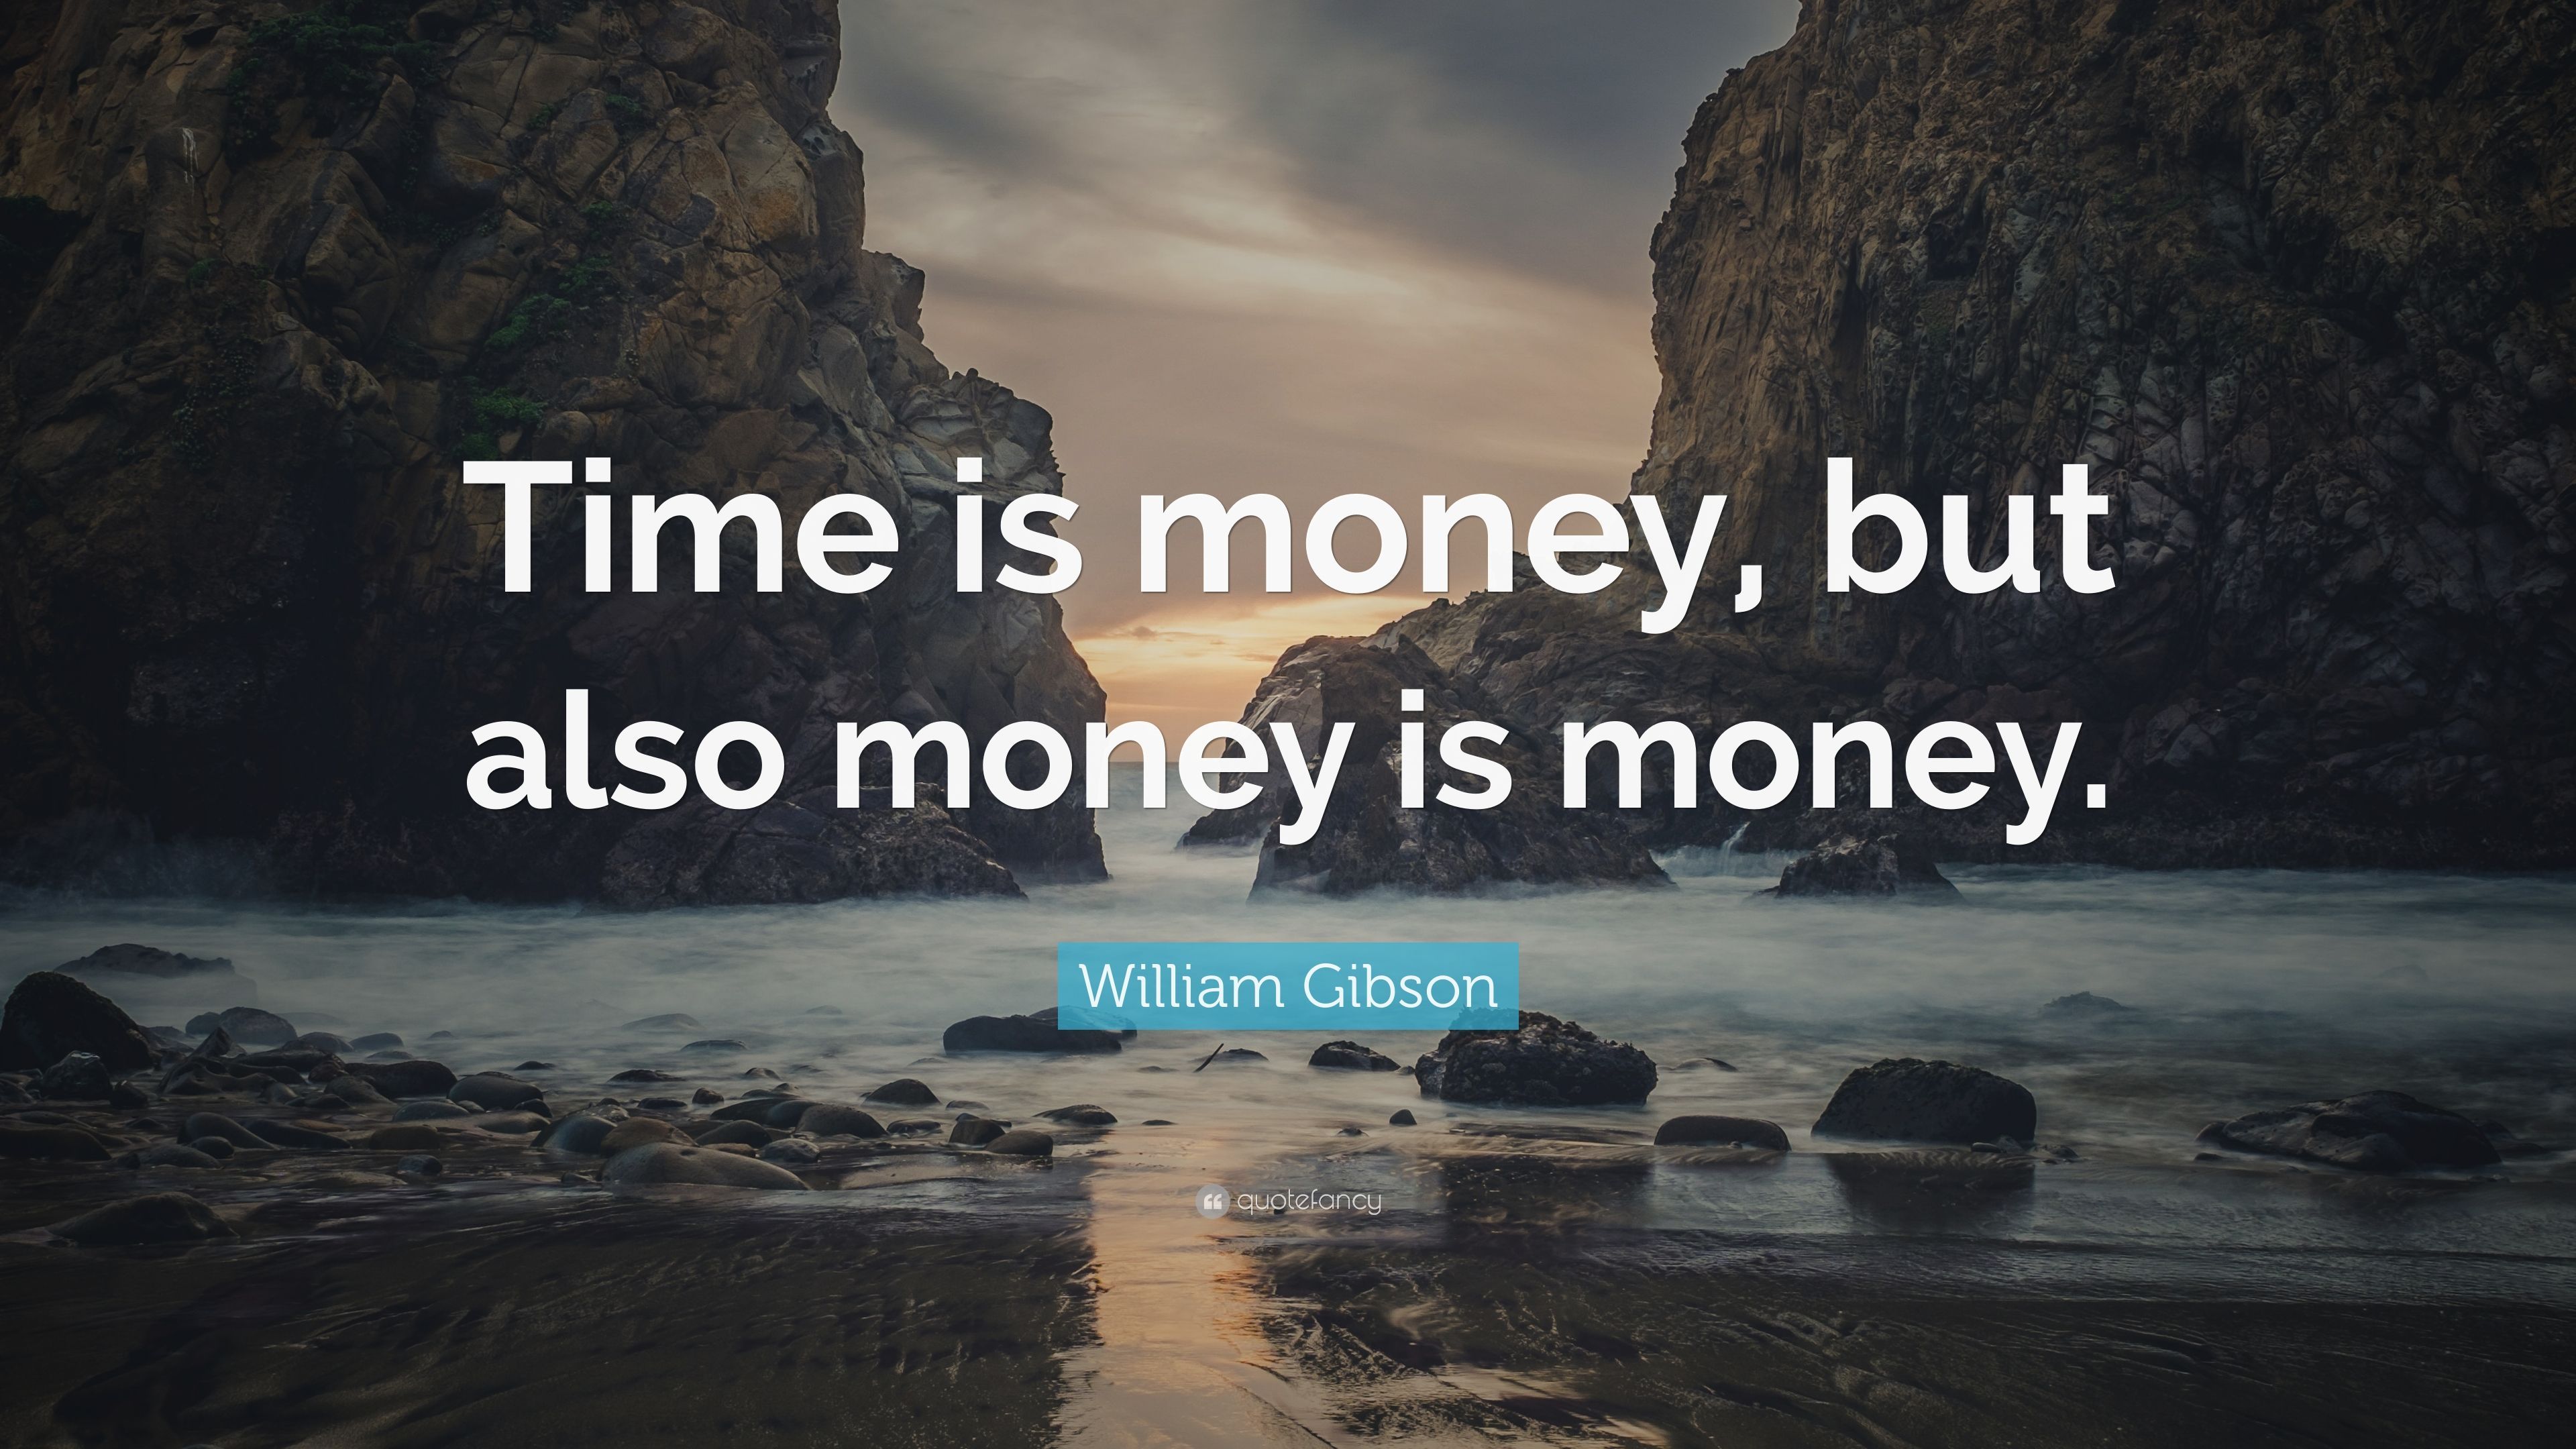 William Gibson Quote: "Time is money, but also money is money. 